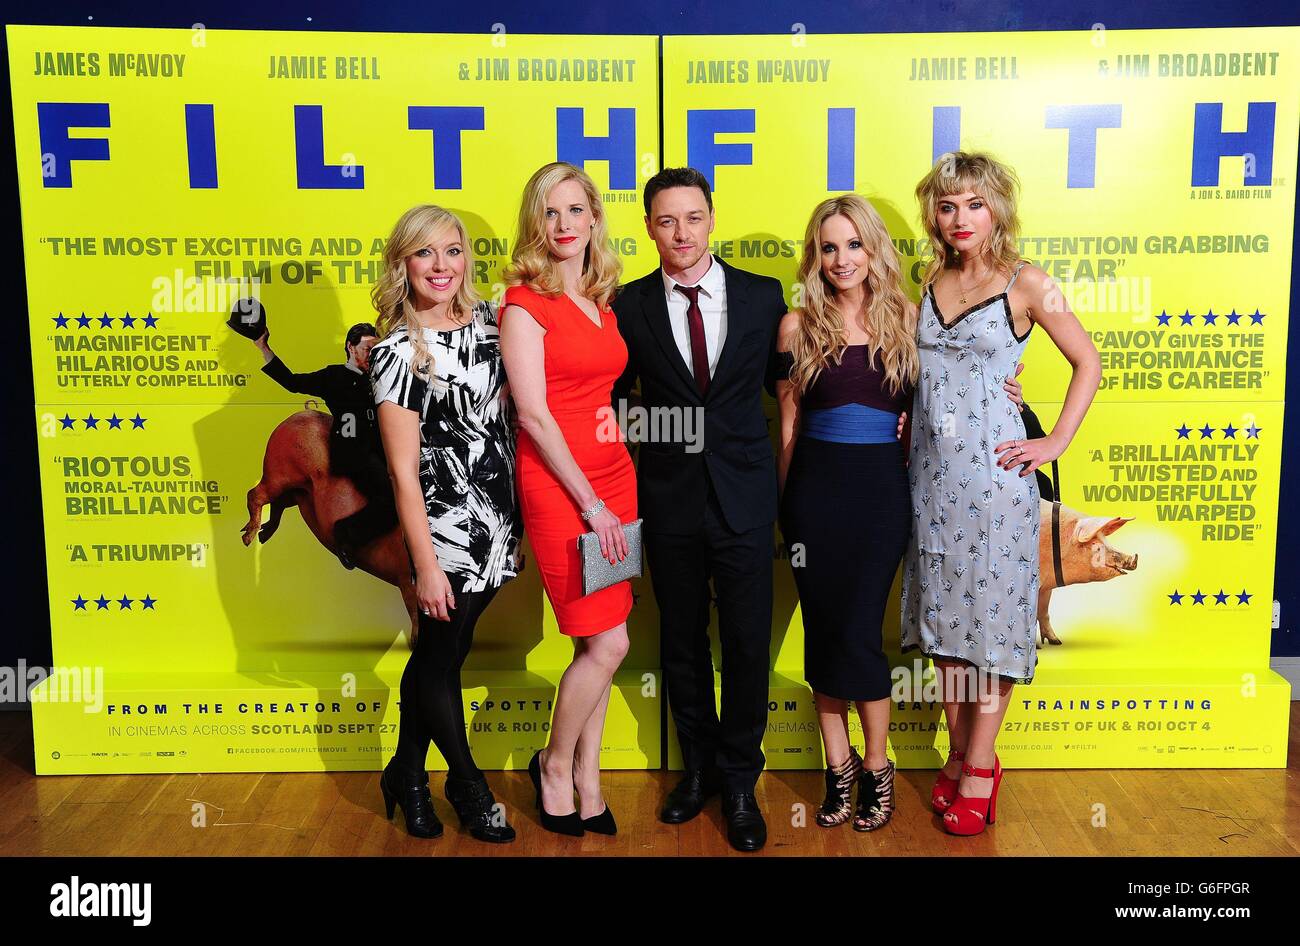 Joy McAvoy, Shauna Macdonald, James McAvoy, Joanne Froggatt and Imogen Poots arrive at the premiere of Filth at the Odeon West End in London. Stock Photo